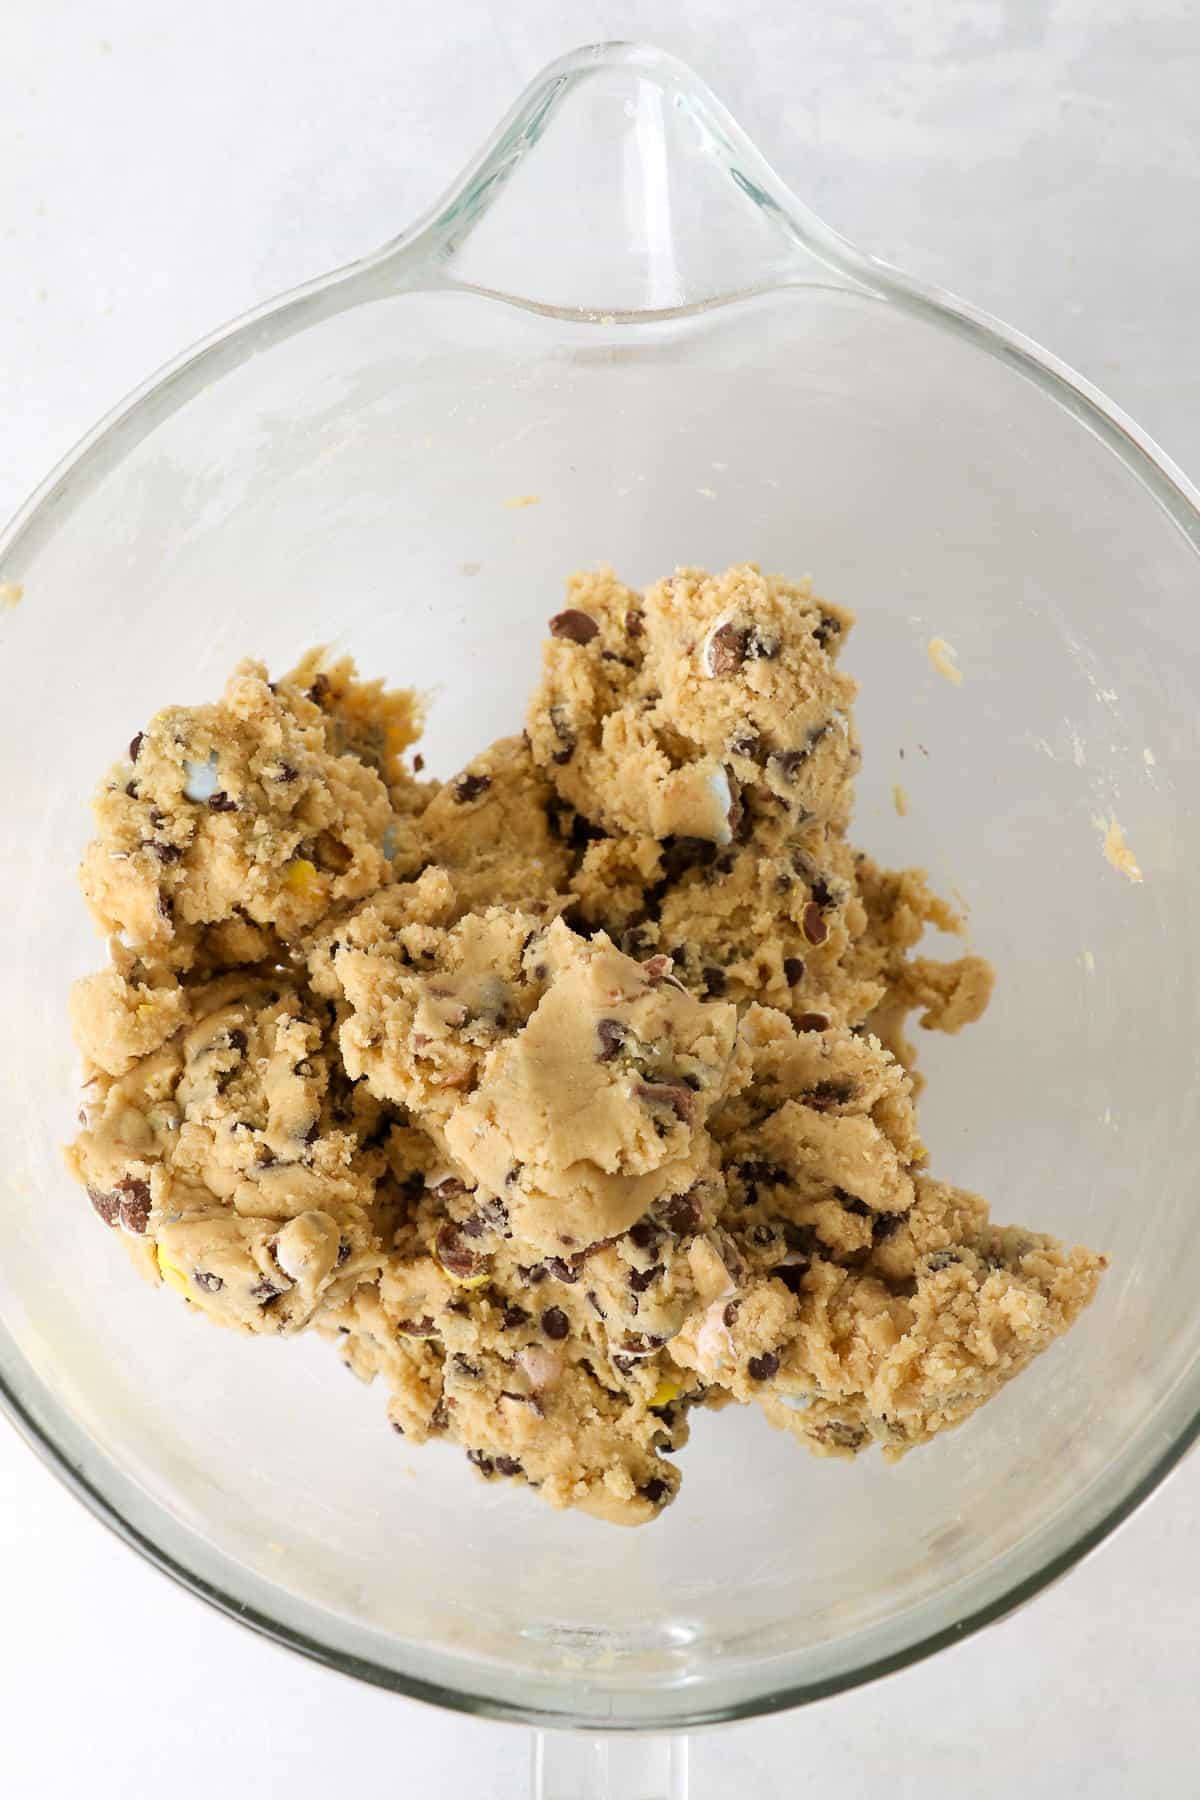 A glass mixing bowl showing the finished cookie dough for a chocolate chip cookie recipe